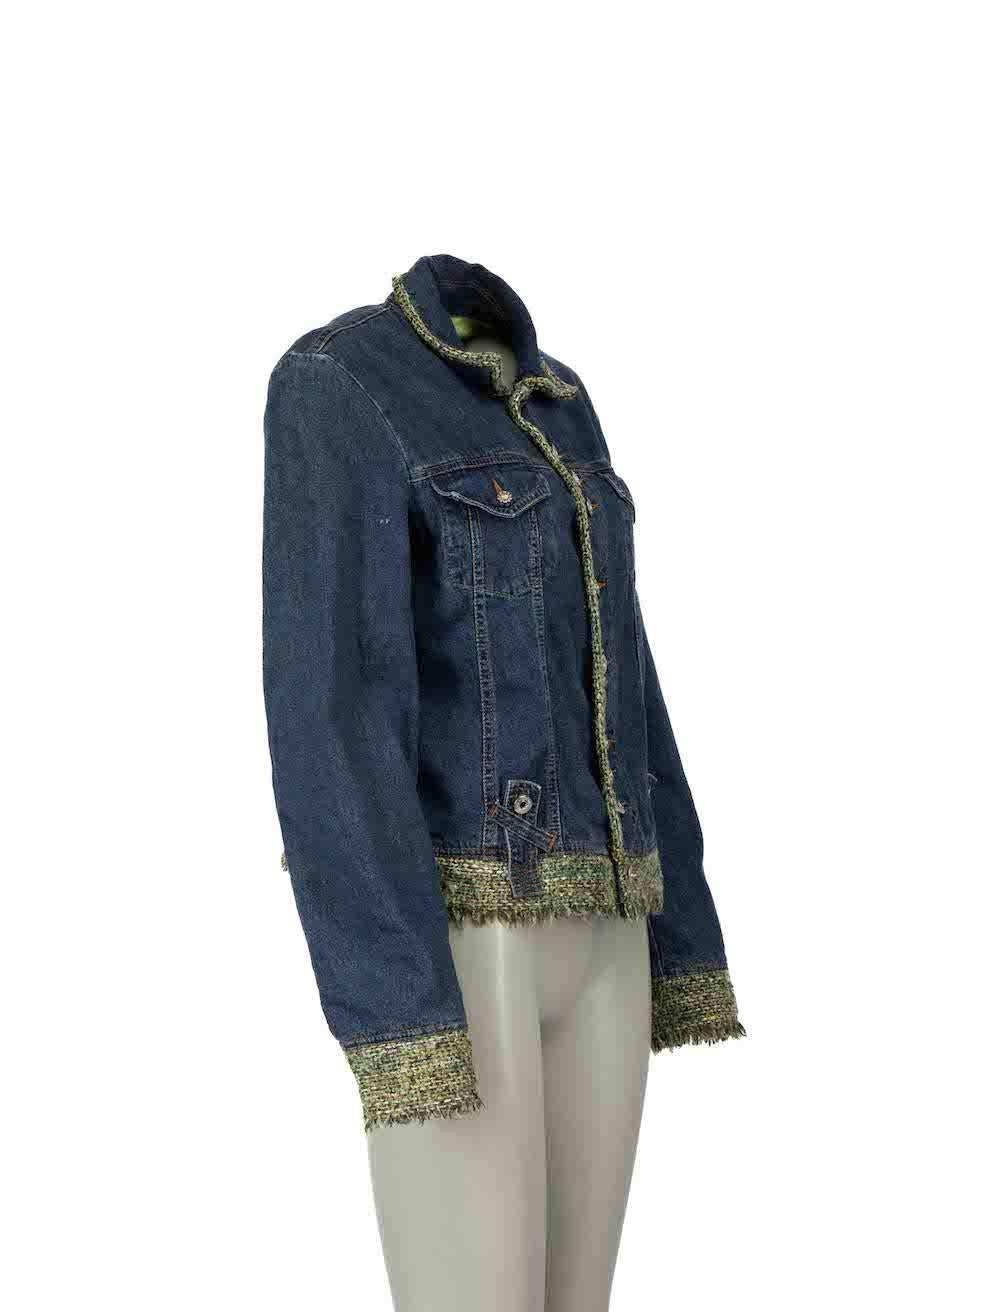 CONDITION is Very good. Minimal wear to jacket is evident. Minimal wear to the right sleeve with small plucks to the denim and pilling to the tweed trim of jacket. The size / composition label has also been removed on this used D&G designer resale